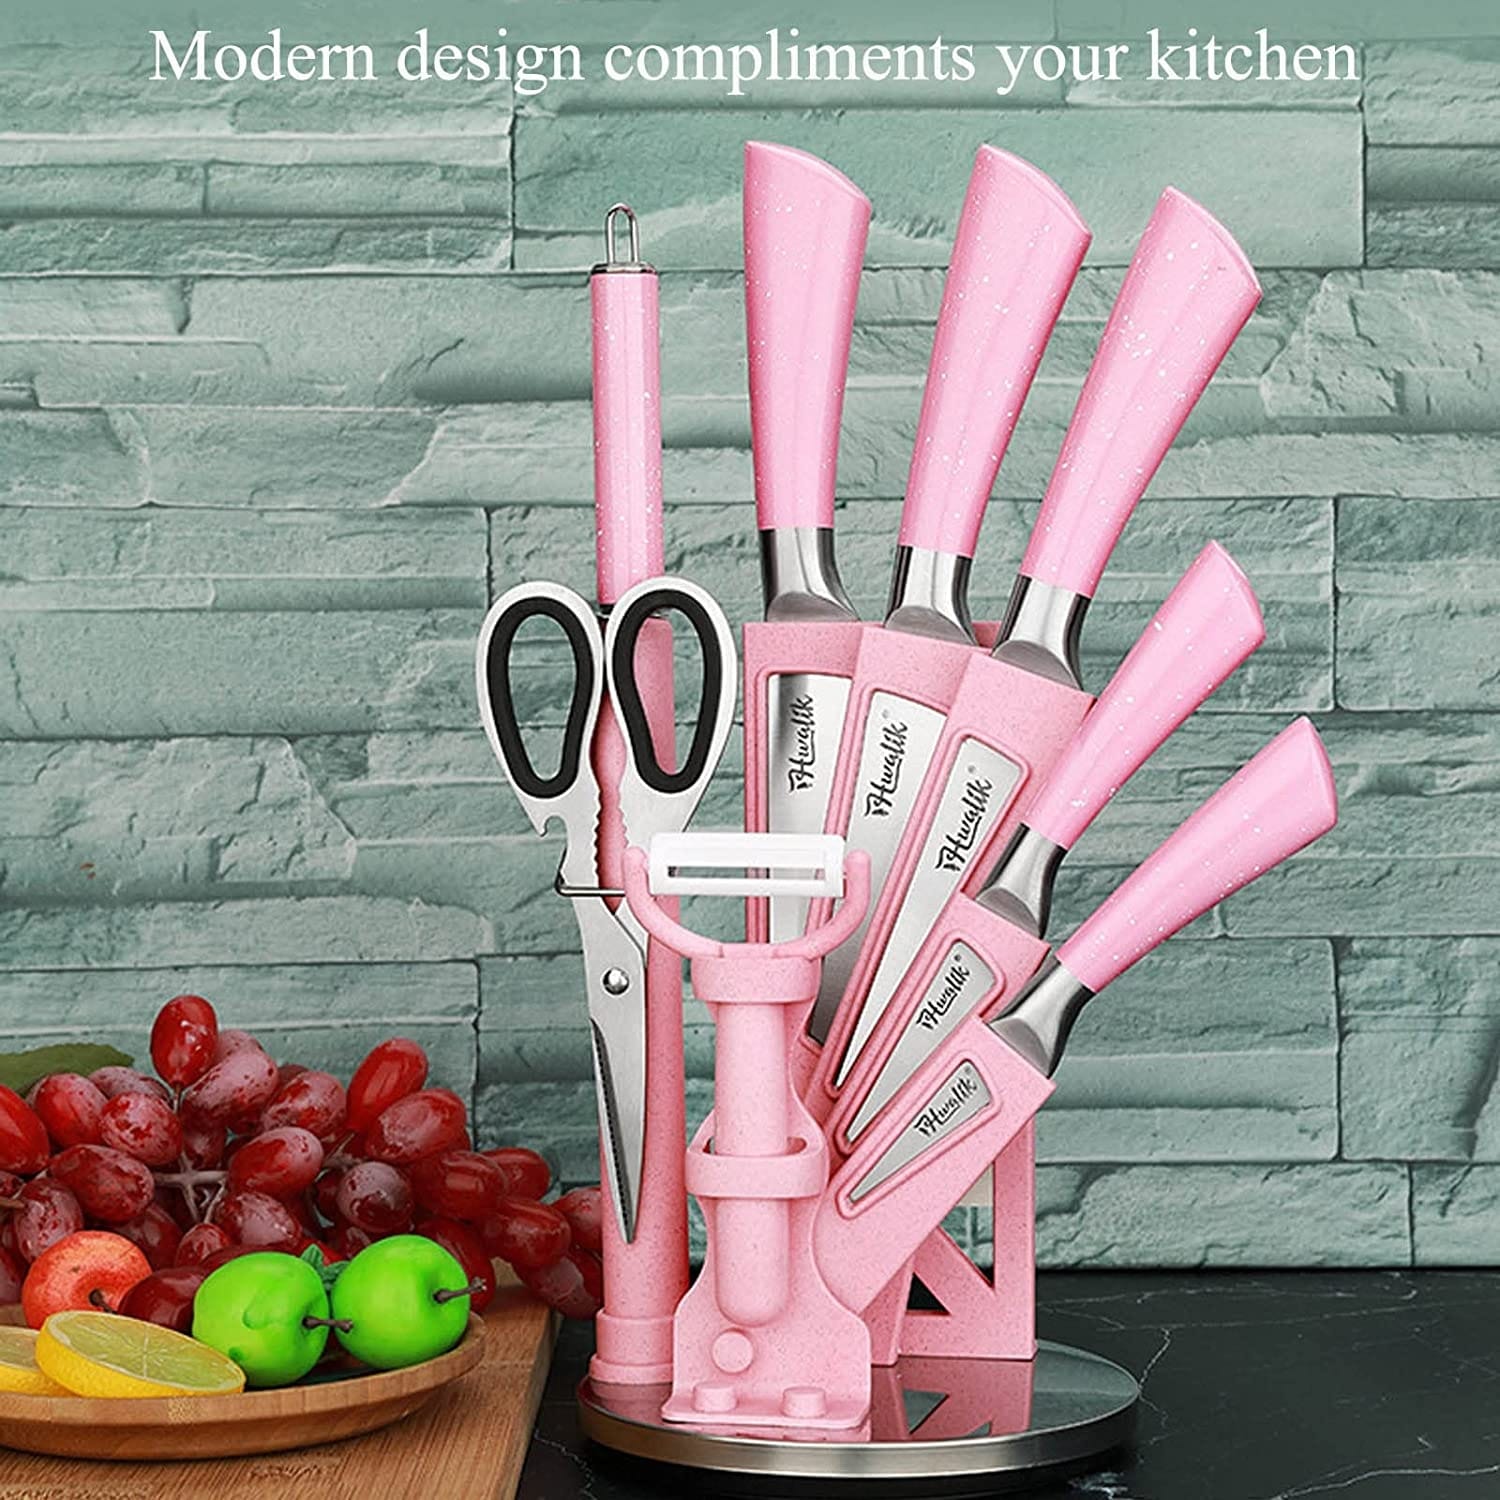 https://ak1.ostkcdn.com/images/products/is/images/direct/0622e6b56e0c49f0fff6936654b26678eb9a0ba0/9PC-Pink-Wheat-Straw-Sharp-Cooking-Knife-Set-with-Acrylic-Stand.jpg